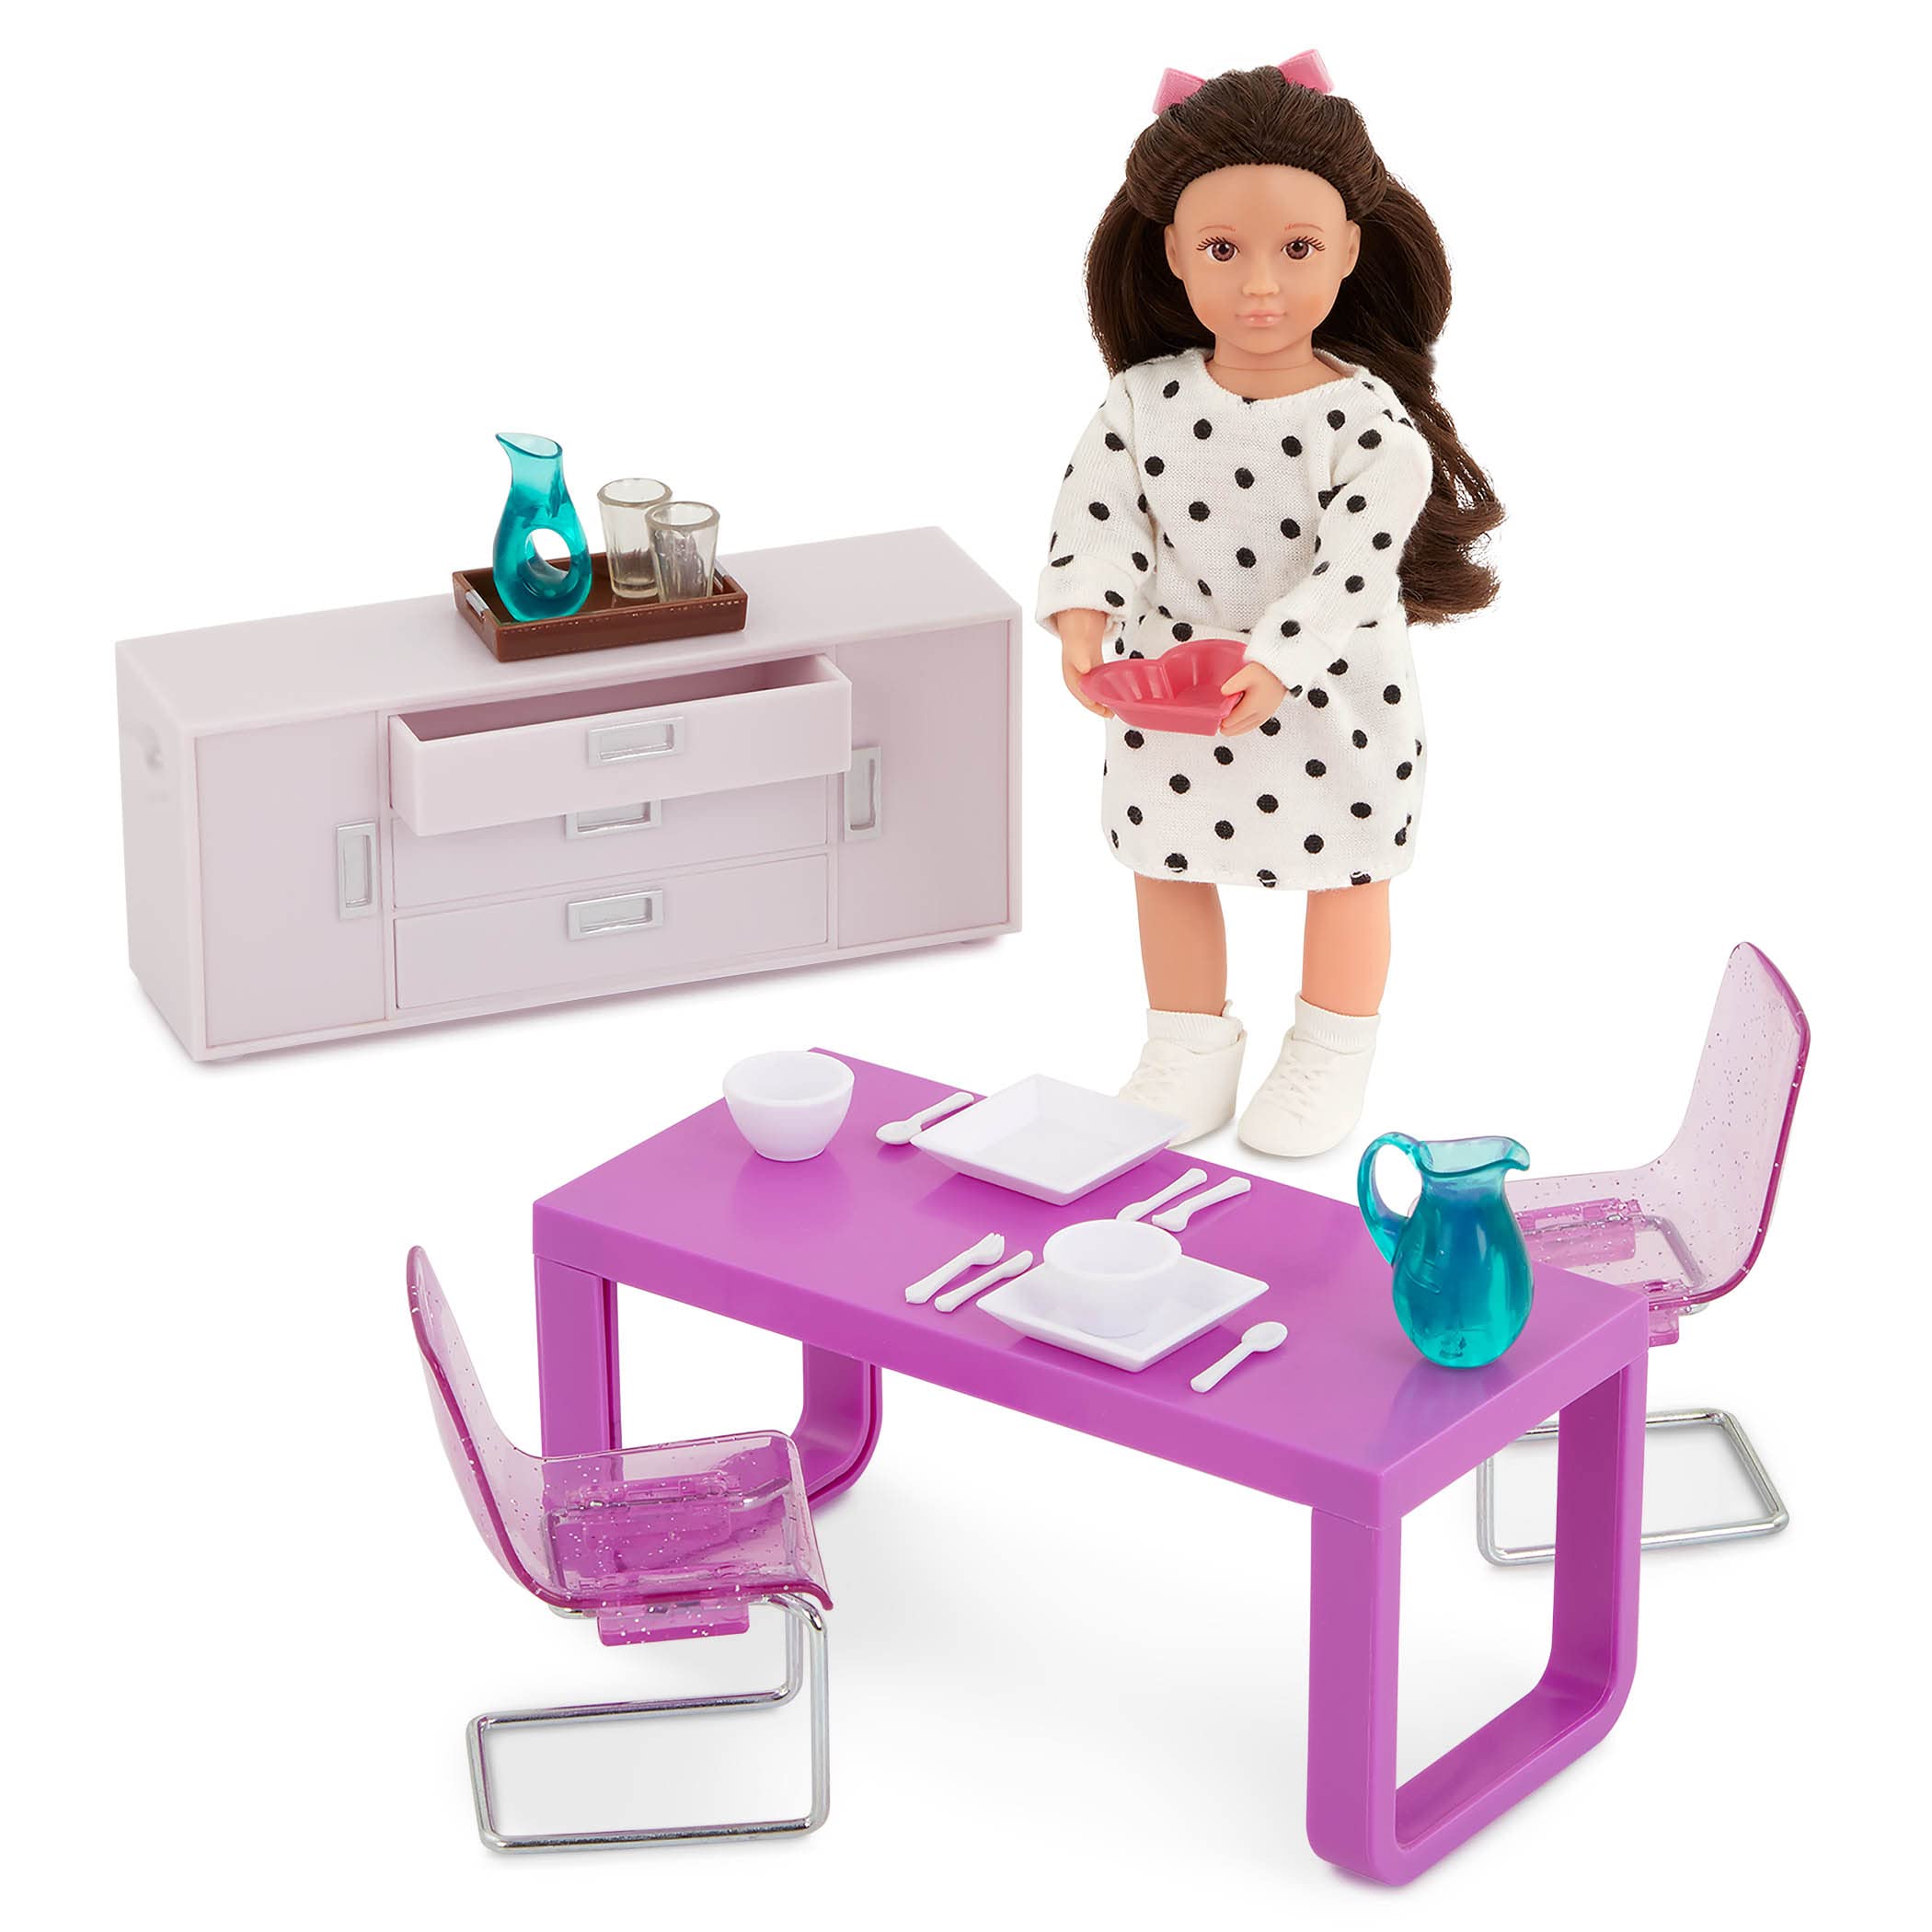 Lori – Mini Doll & Toy Dining Room Furniture – 6-inch Doll & Dollhouse Accessories – Table, Chairs, Dishes, Cutlery – Play Set for Kids – 3 Years + – Amelia’s Dining Room Set